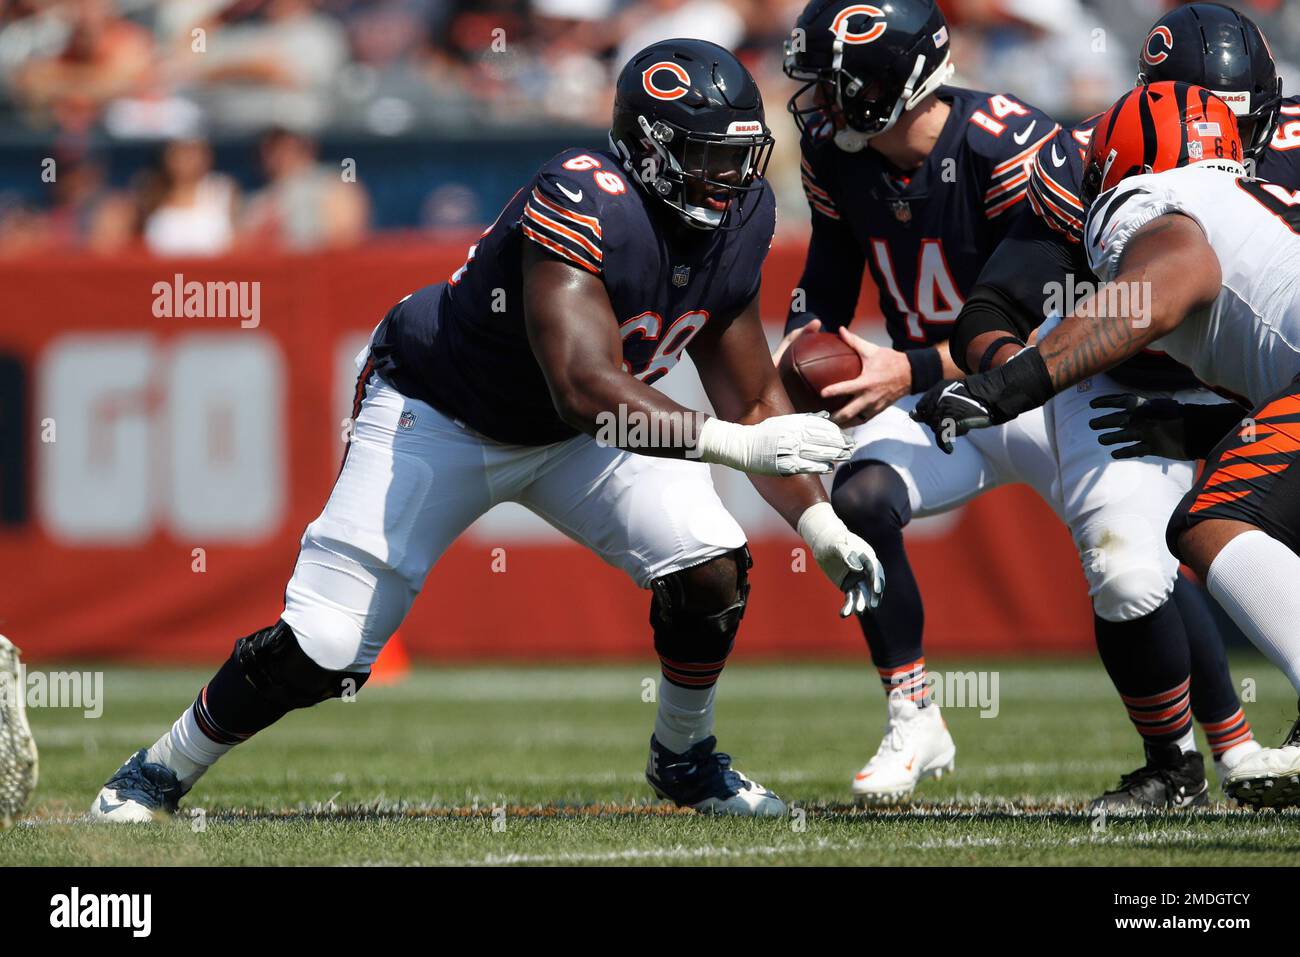 Bears Rewind: Led by James Daniels, the offensive line prevented